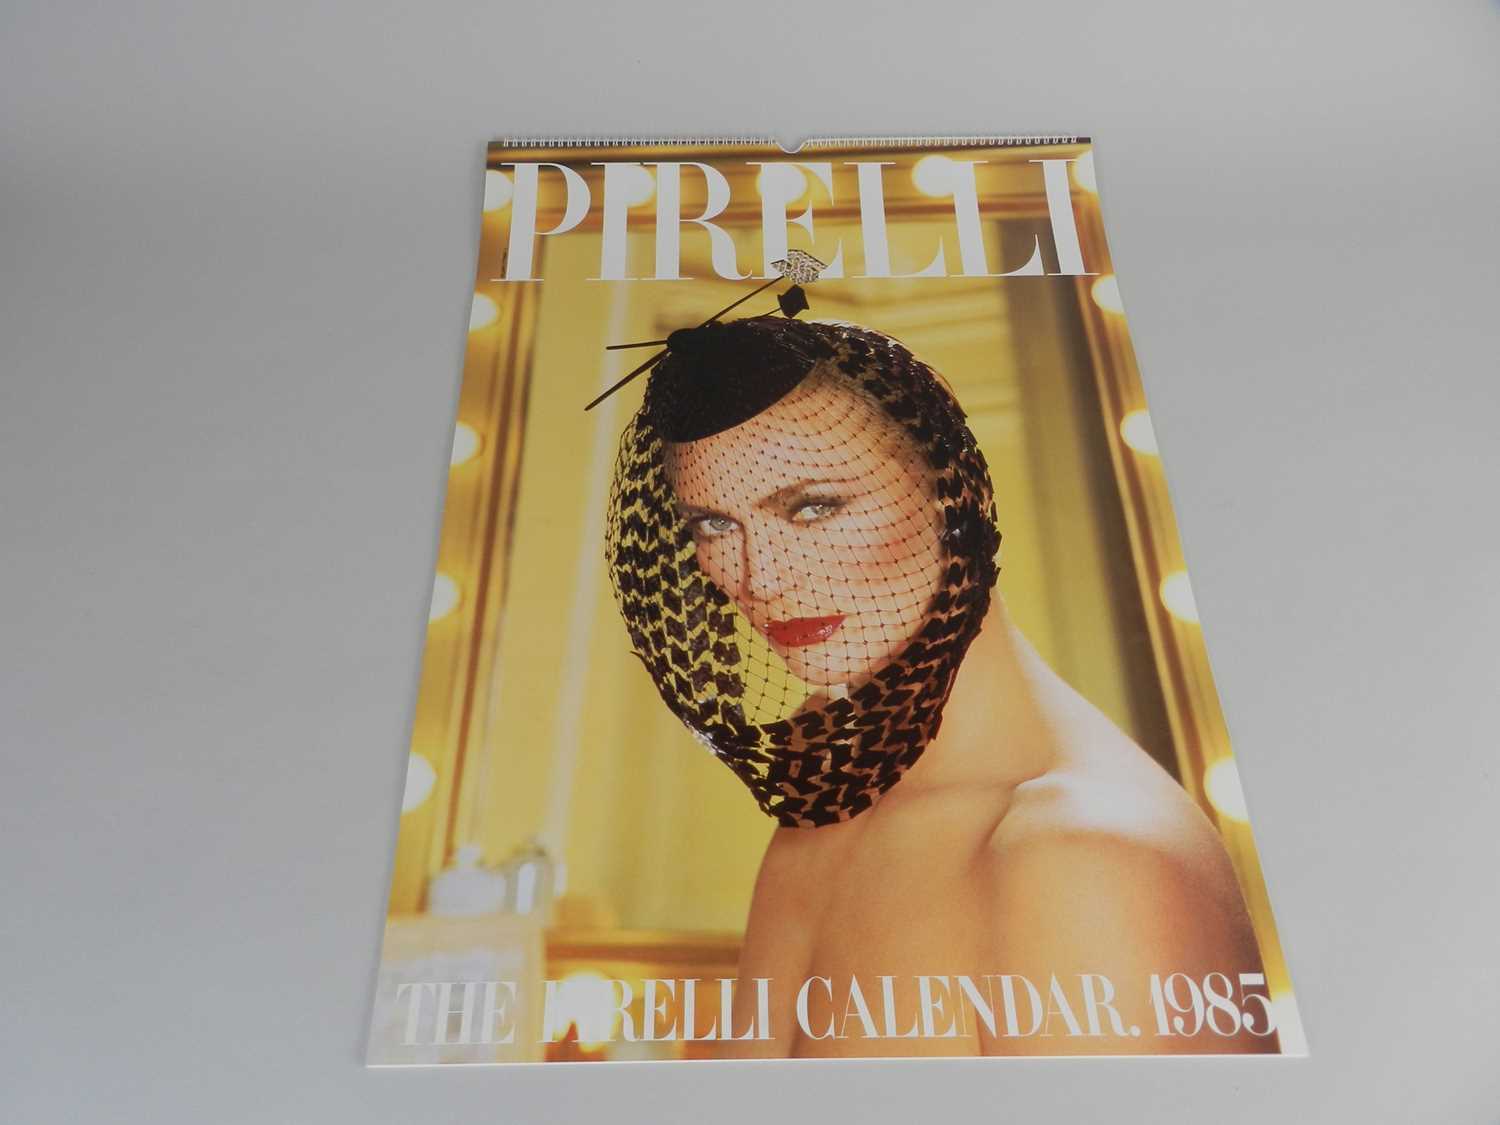 A collection of twelve Pirelli calendars including 1969 and 80-90s.